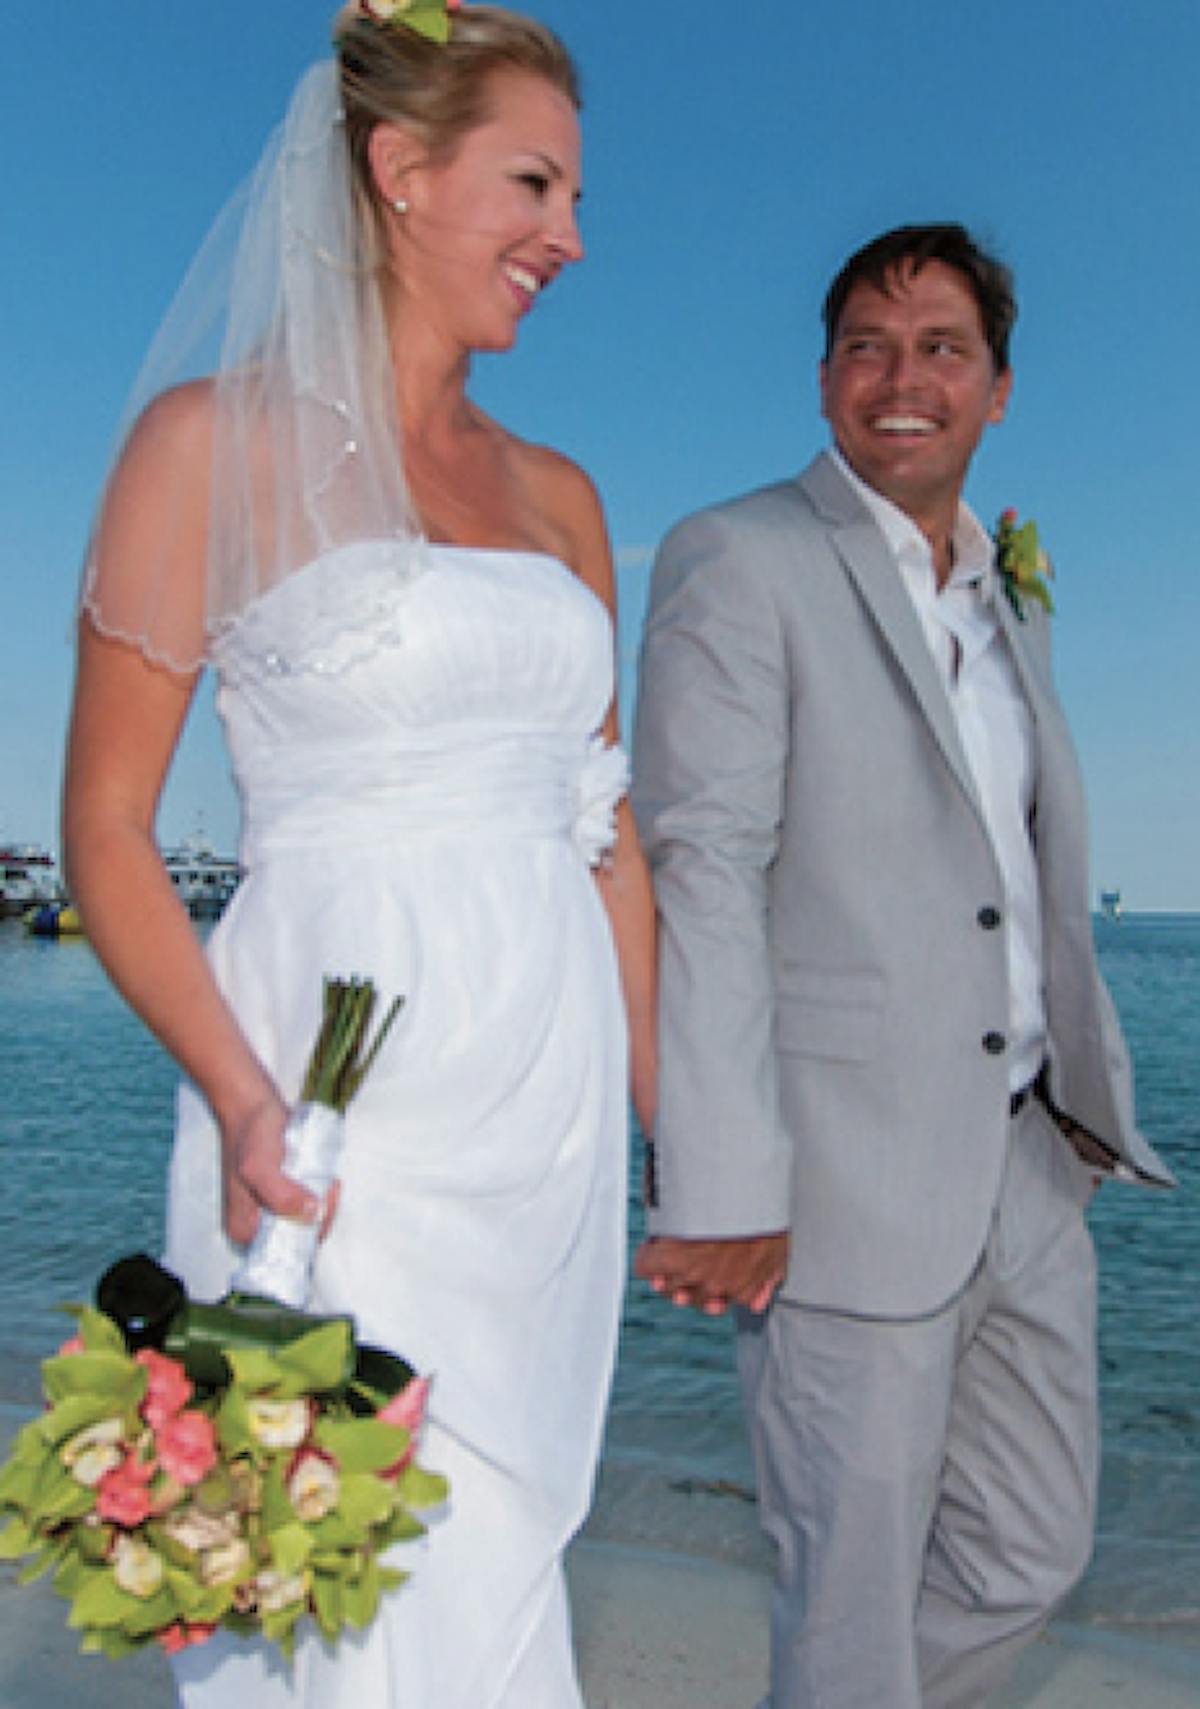 requirements to get married in the bahamas